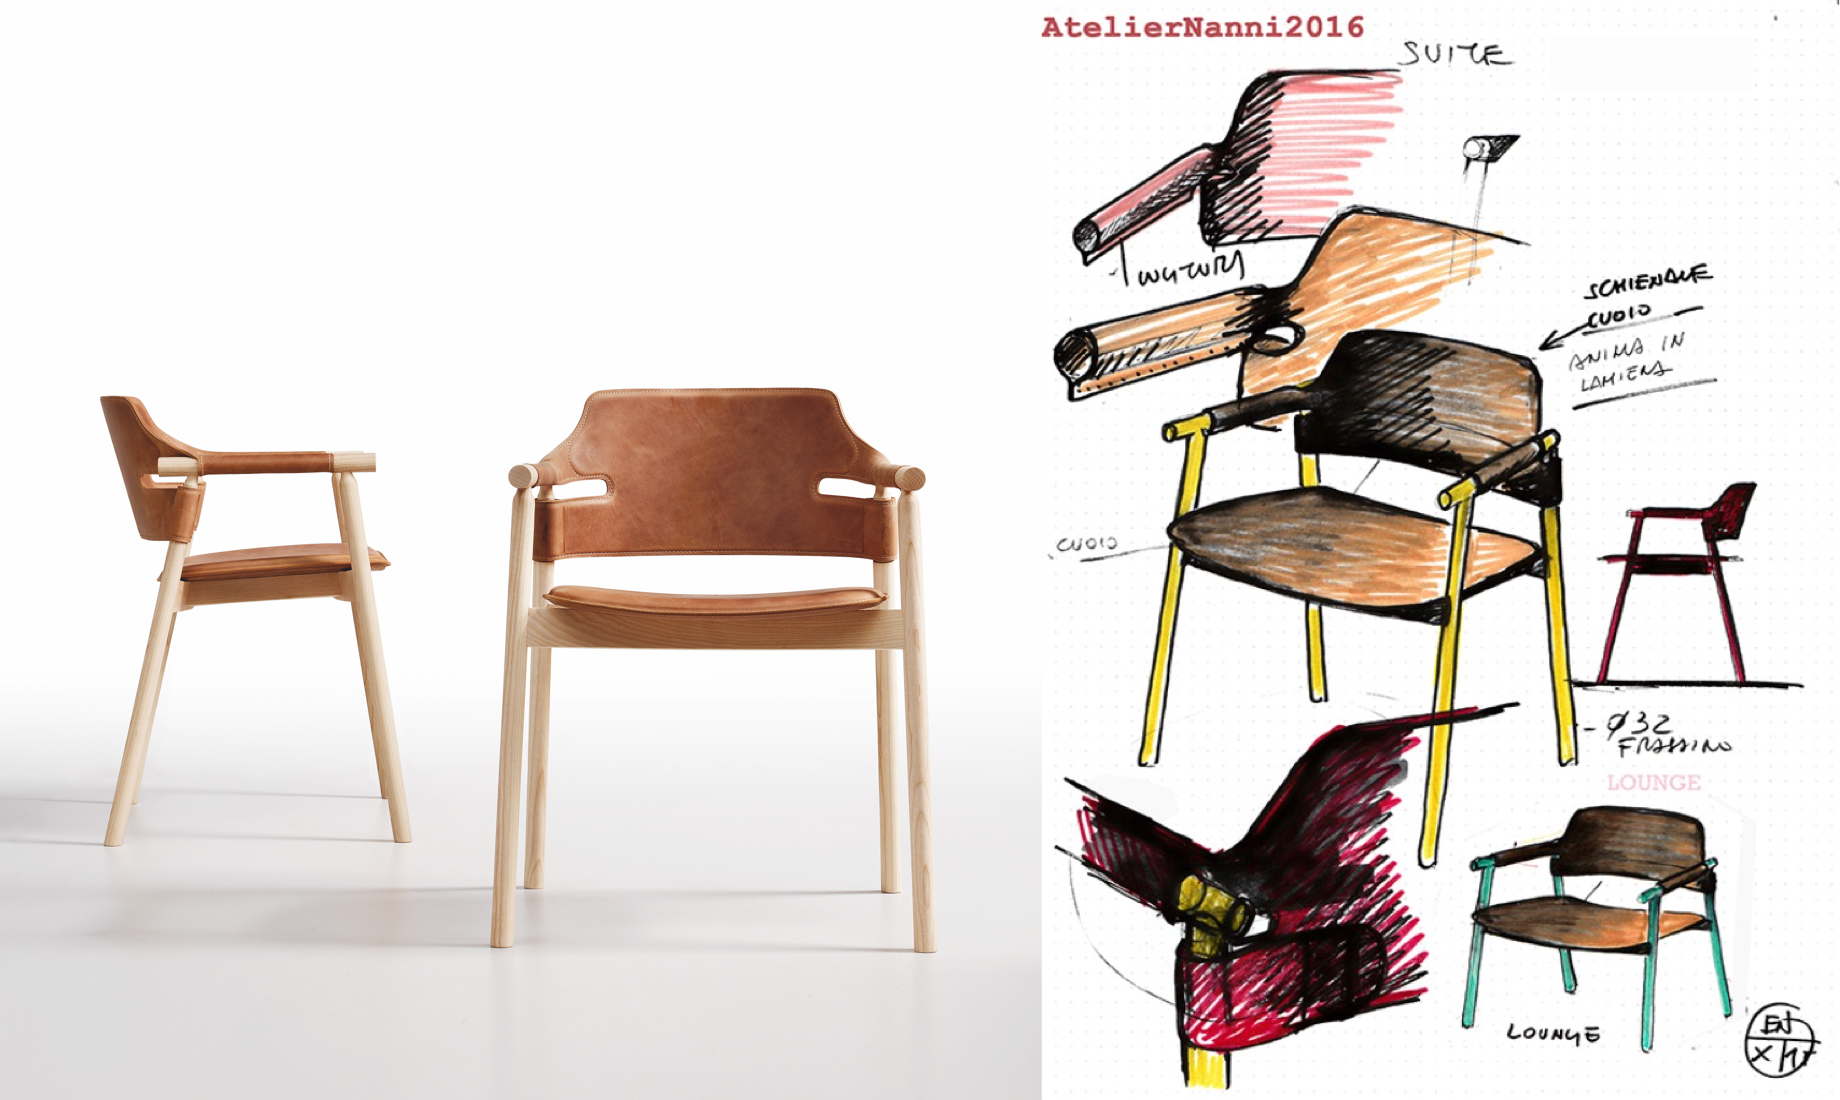 On the left our Suite armchair, on the right a sketch of its design by AtelierNanni.